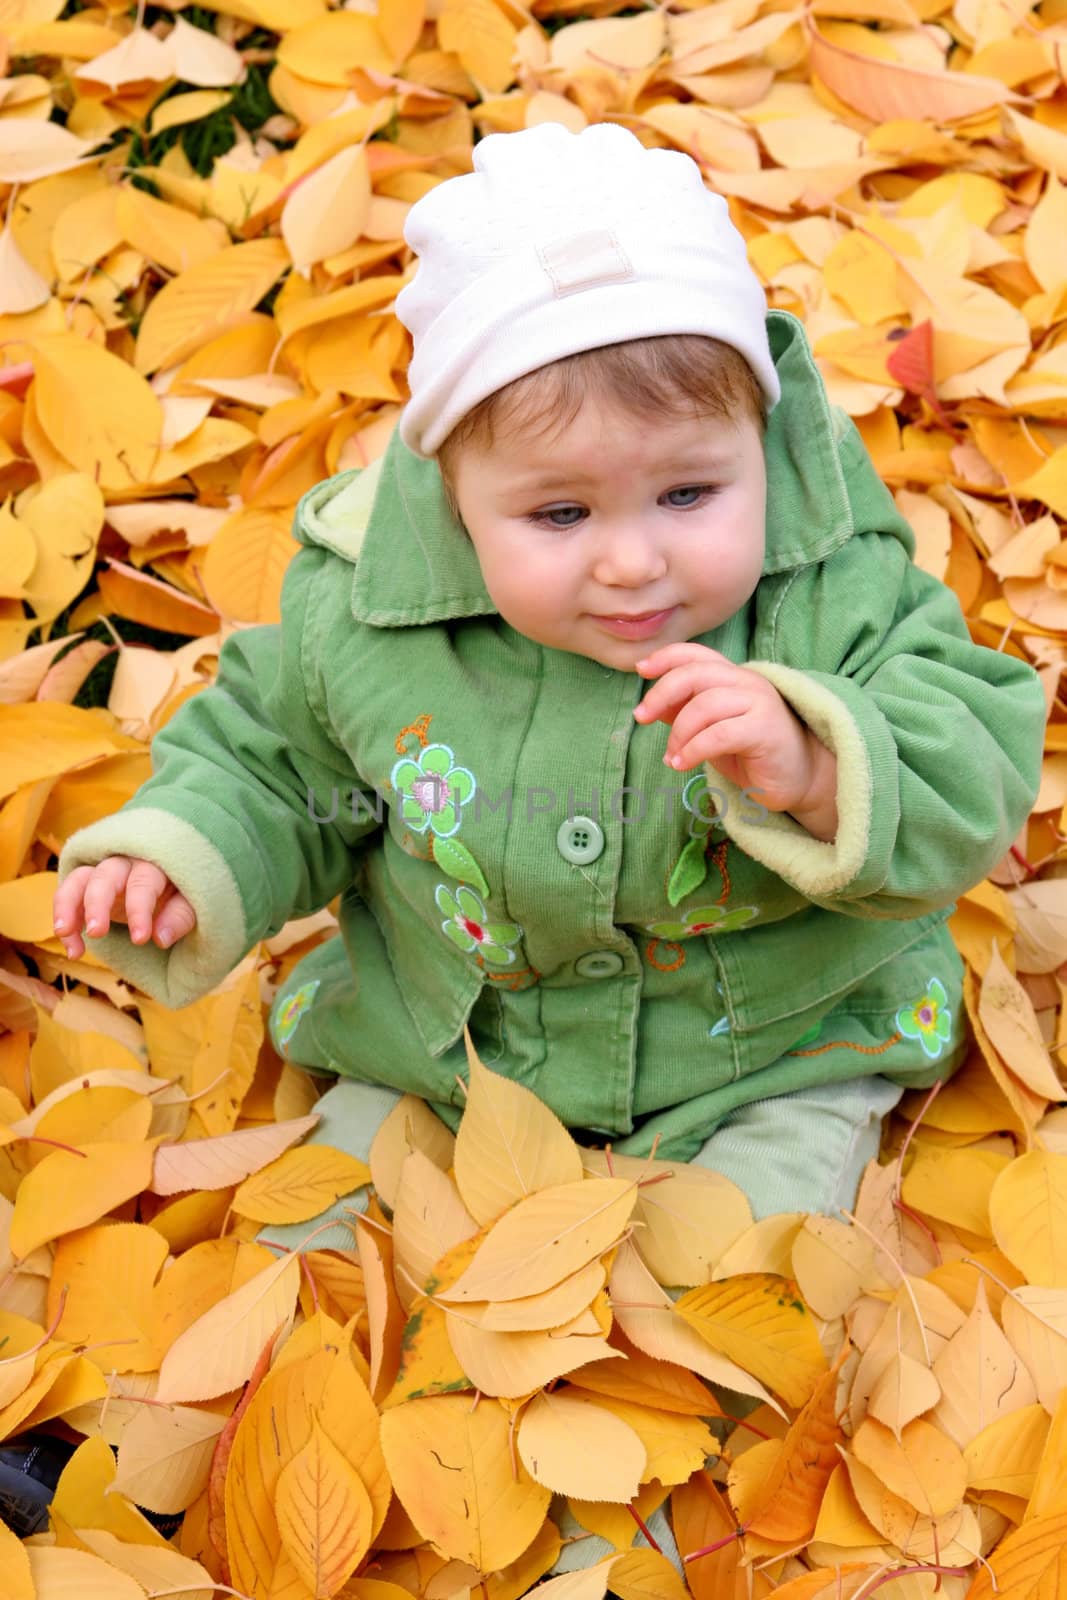 baby at a park in Autumn